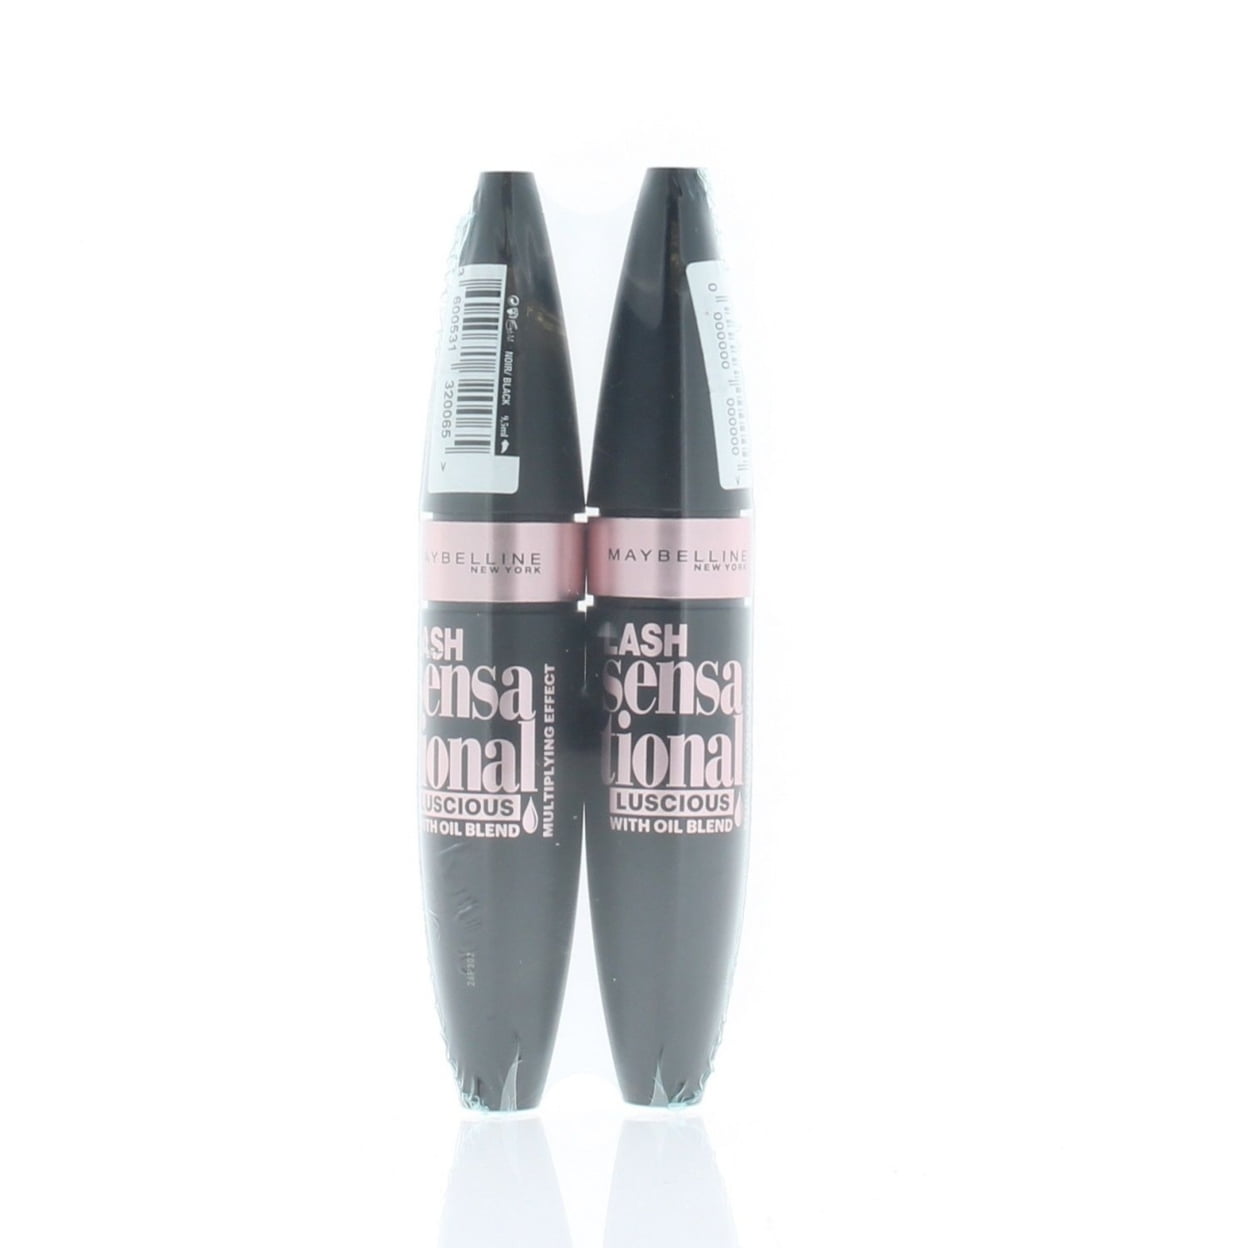 Maybelline Lash Sensational with Pack) Luscious 9.5ml Oil (2 Black Blend